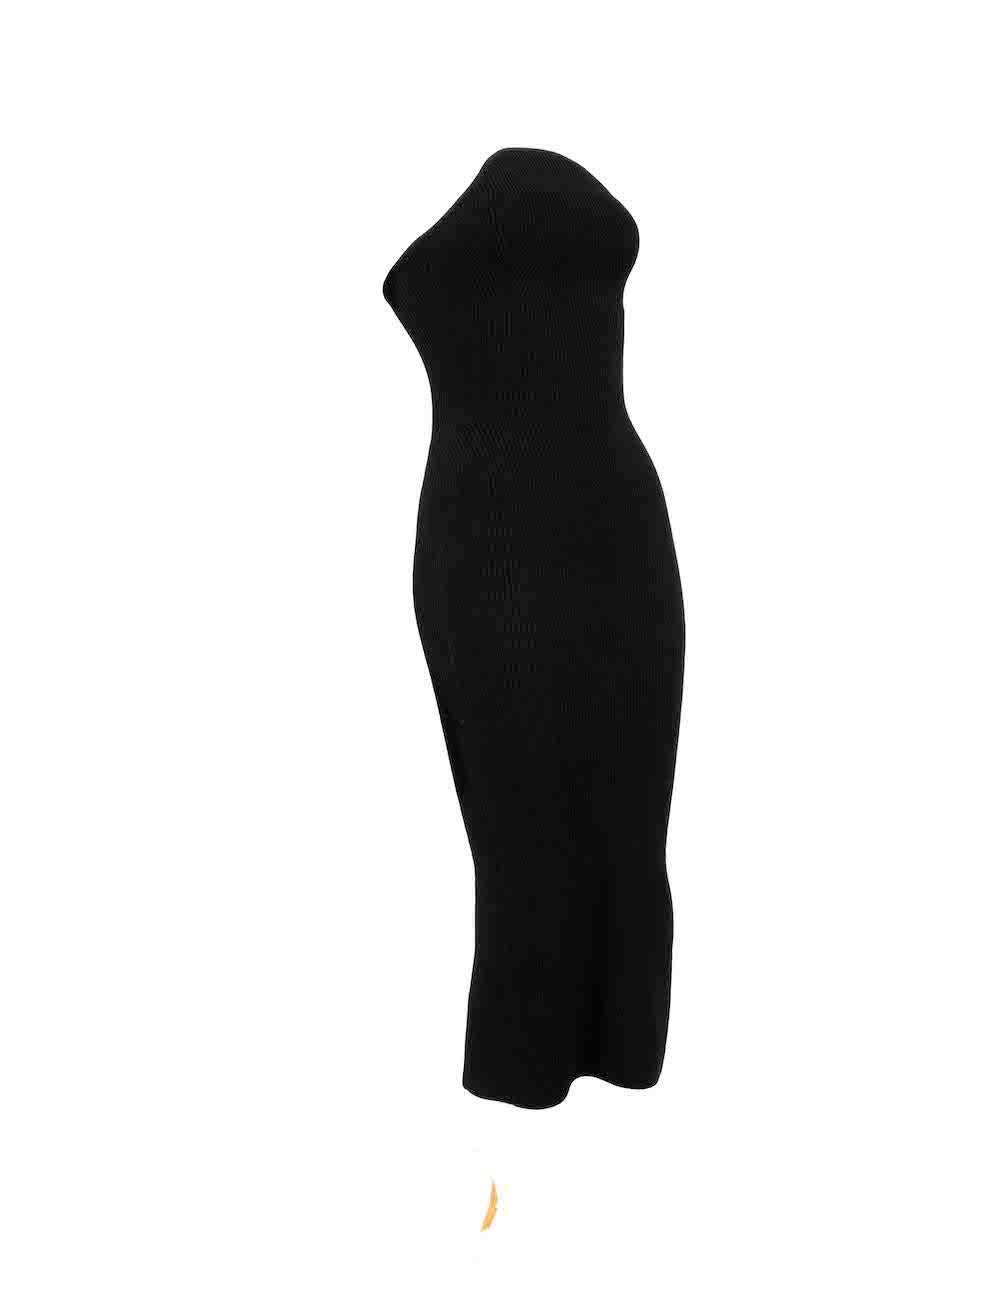 CONDITION is Never worn, with tags. No visible wear to dress is evident on this new Khaite designer resale item.
 
 
 
 Details
 
 
 Black
 
 Viscose
 
 Midi dress
 
 Rib knitted and stretchy
 
 Strapless and sleeveless
 
 Back slit
 
 
 
 
 
 Made